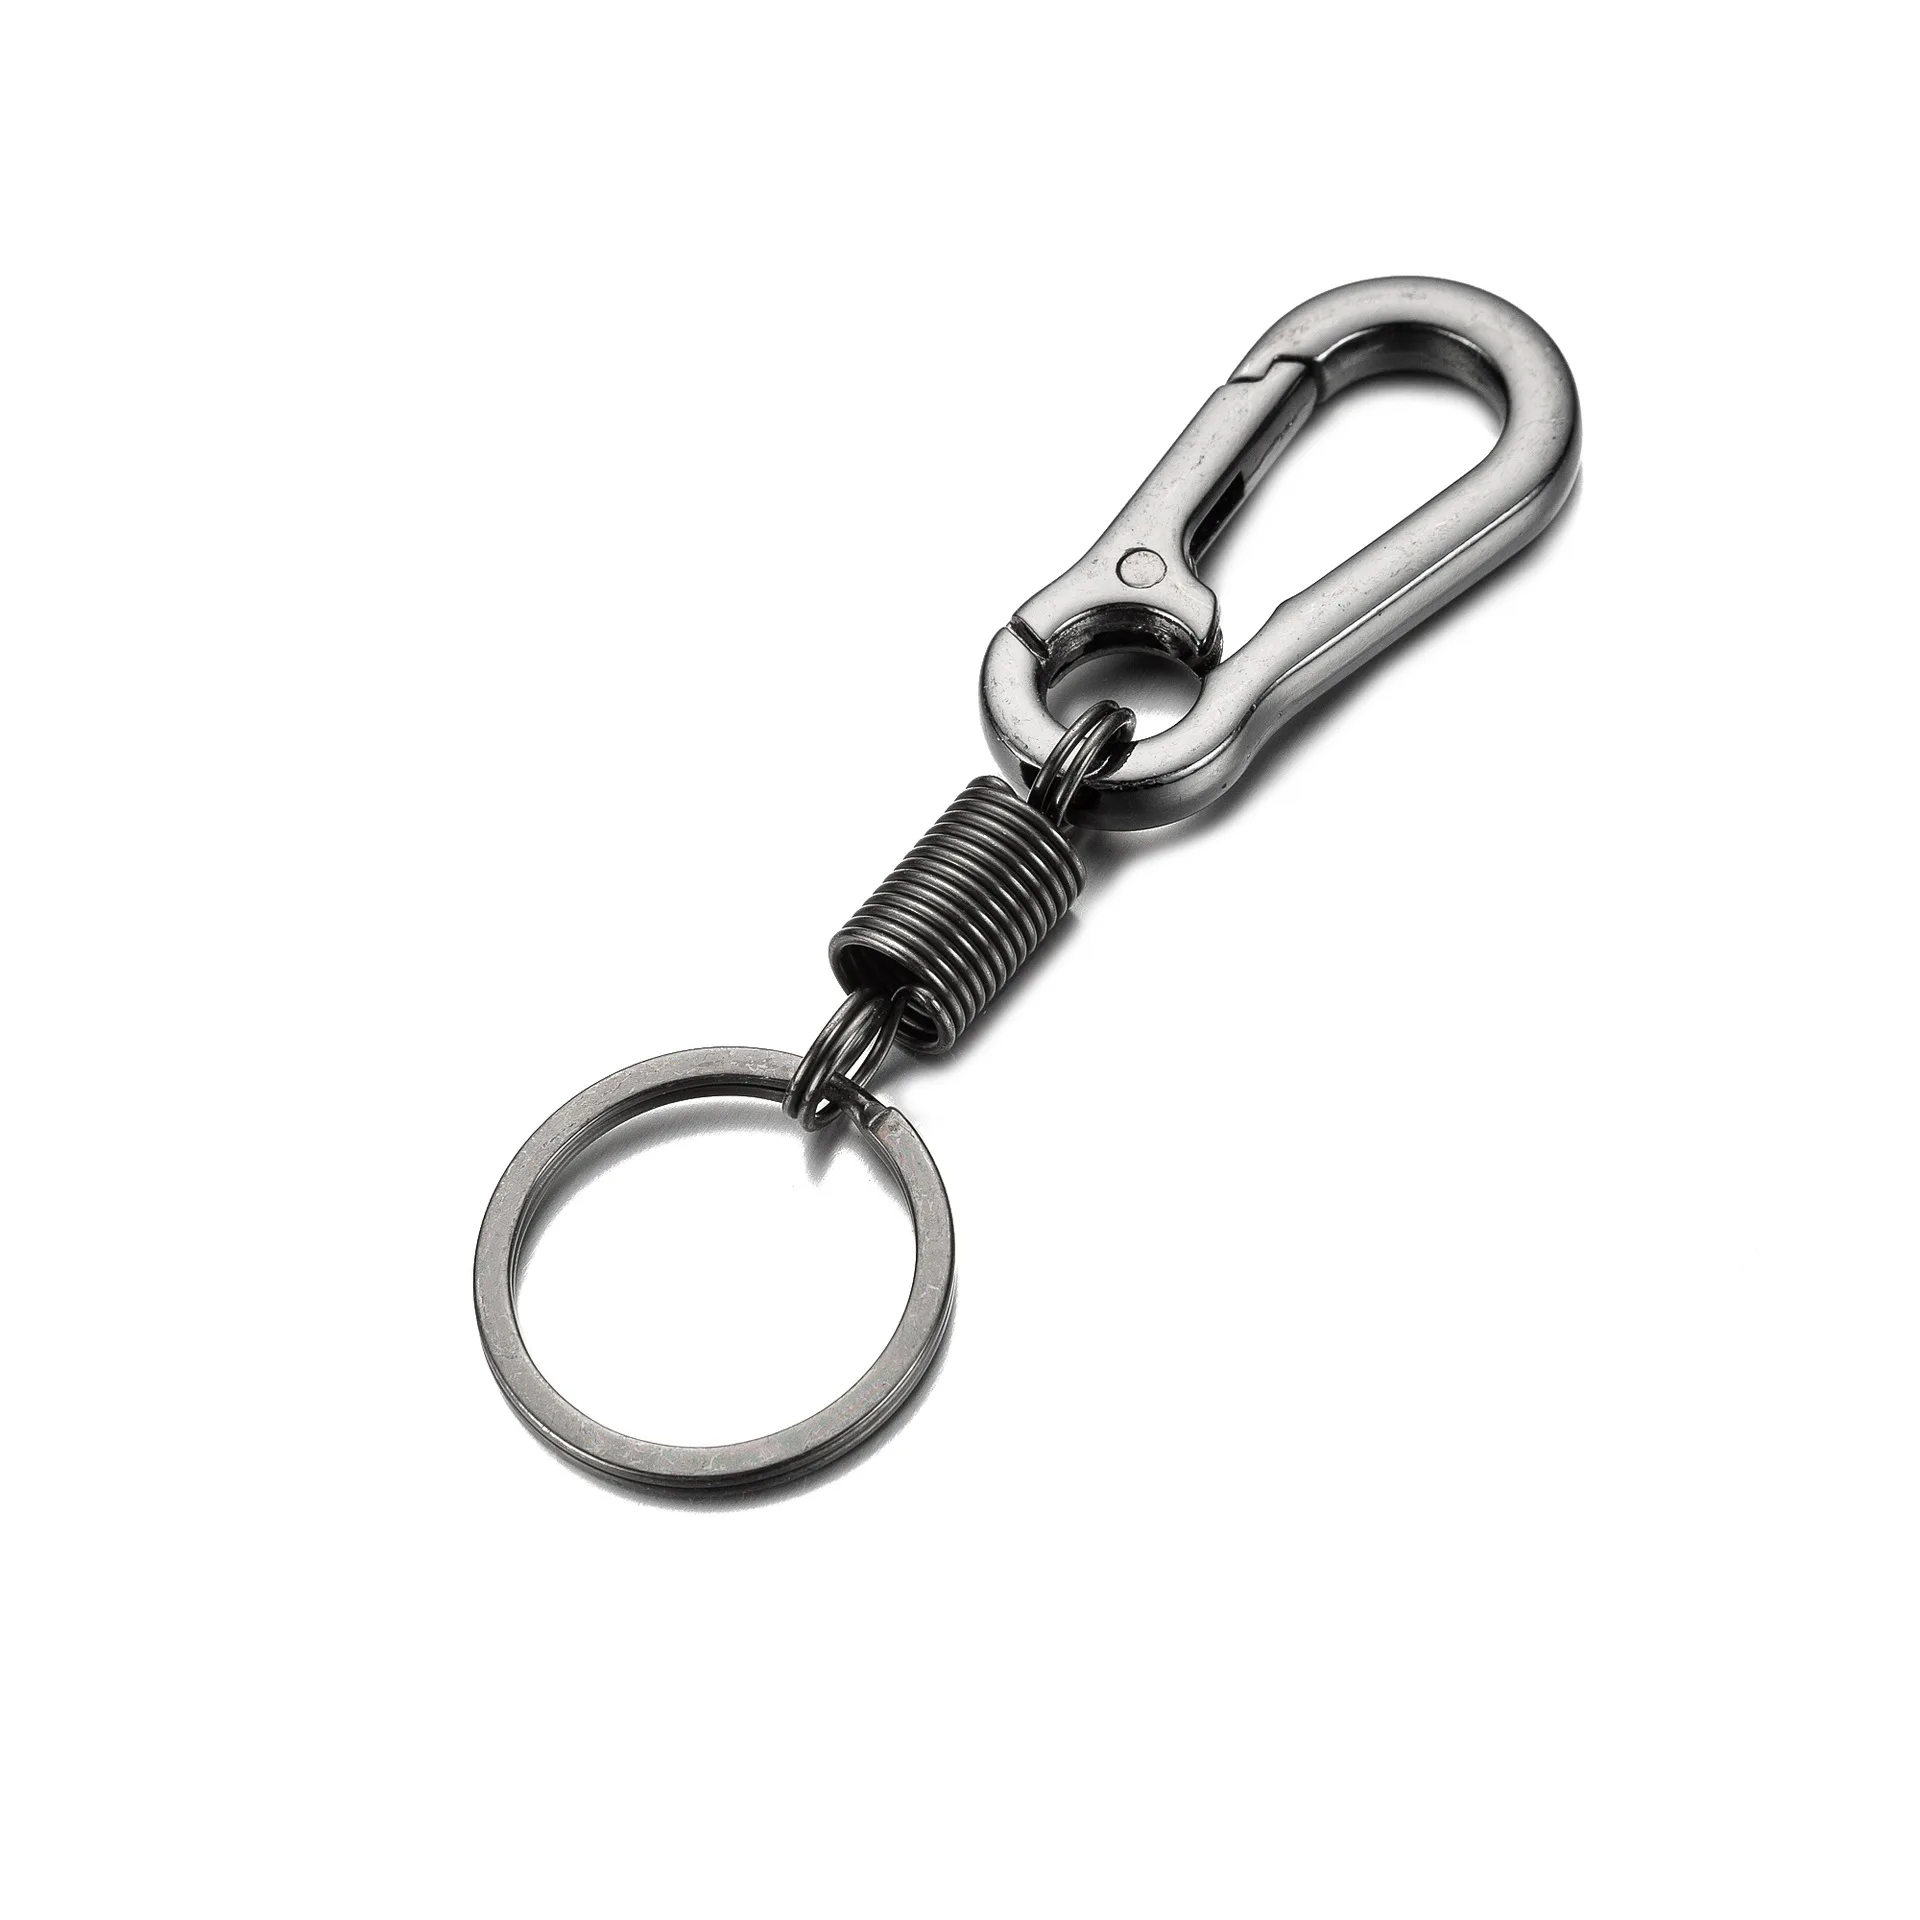 Sporting Ablack Stainless Steel Spring Key Chain Gourd Buckle Carabiner Keychain - £23.52 GBP